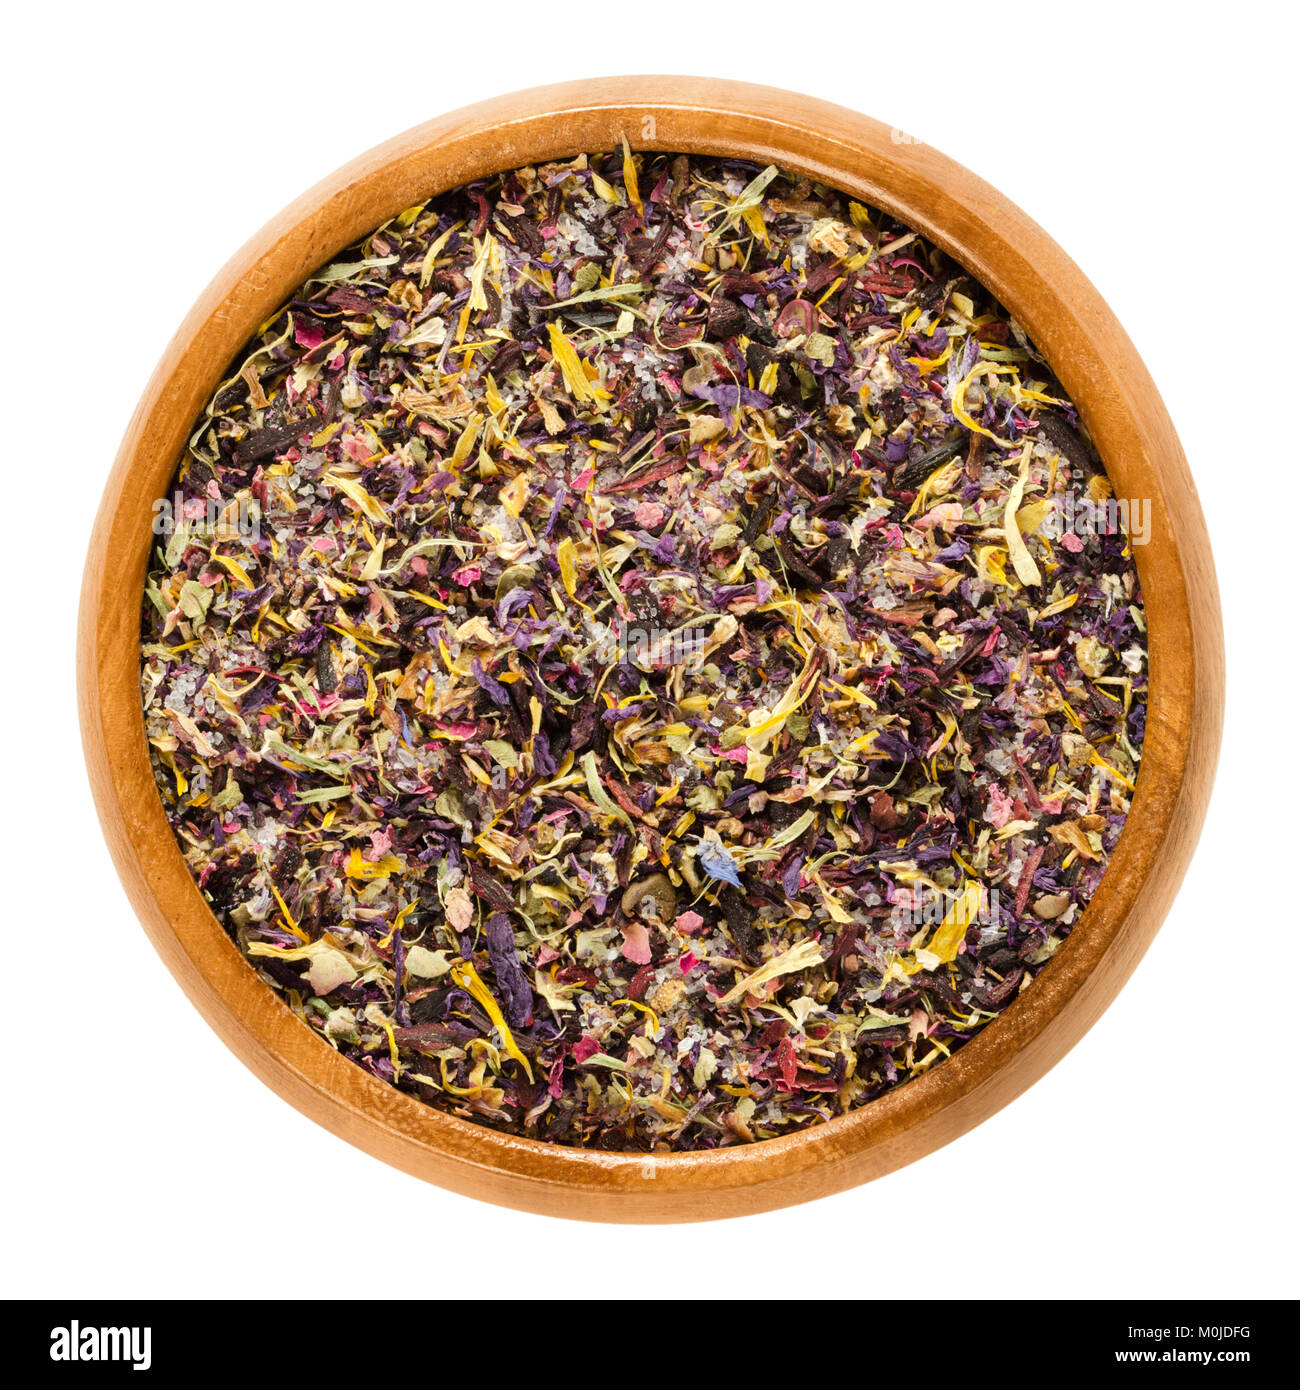 Blossom salt in wooden bowl. Desert salt with colorful dried flower blossoms of hibiscus, marigold, rose, mallow and cornflower. Stock Photo